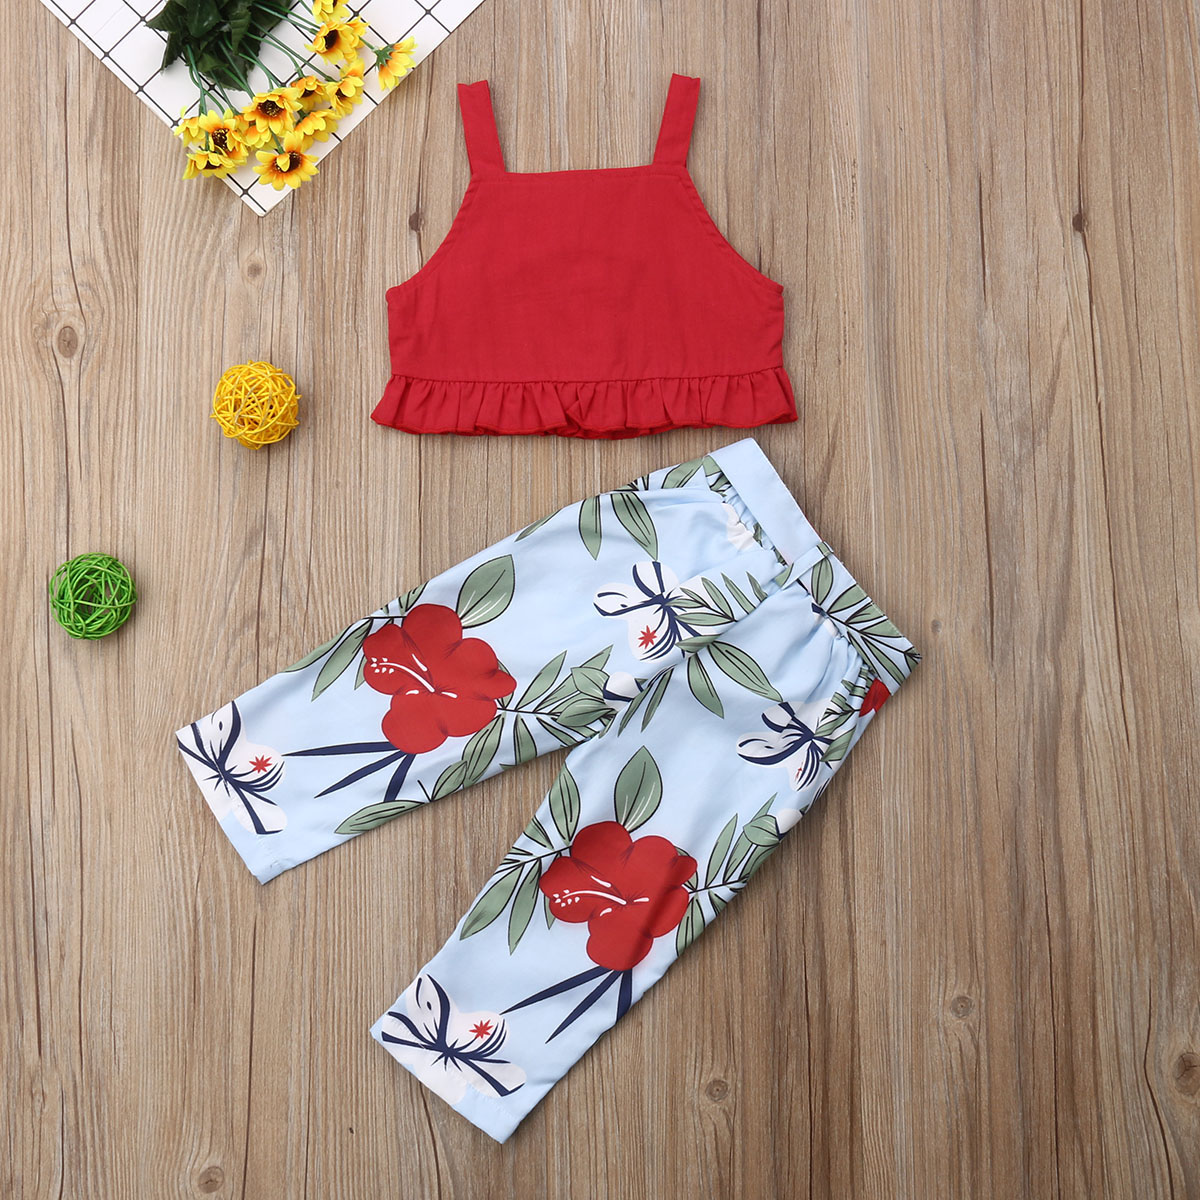 Shorts Pants Summer Beach 2Pcs Outfits Set Toddler Baby Girl Strap Clothes Sleeveless Floral Crop Tops 